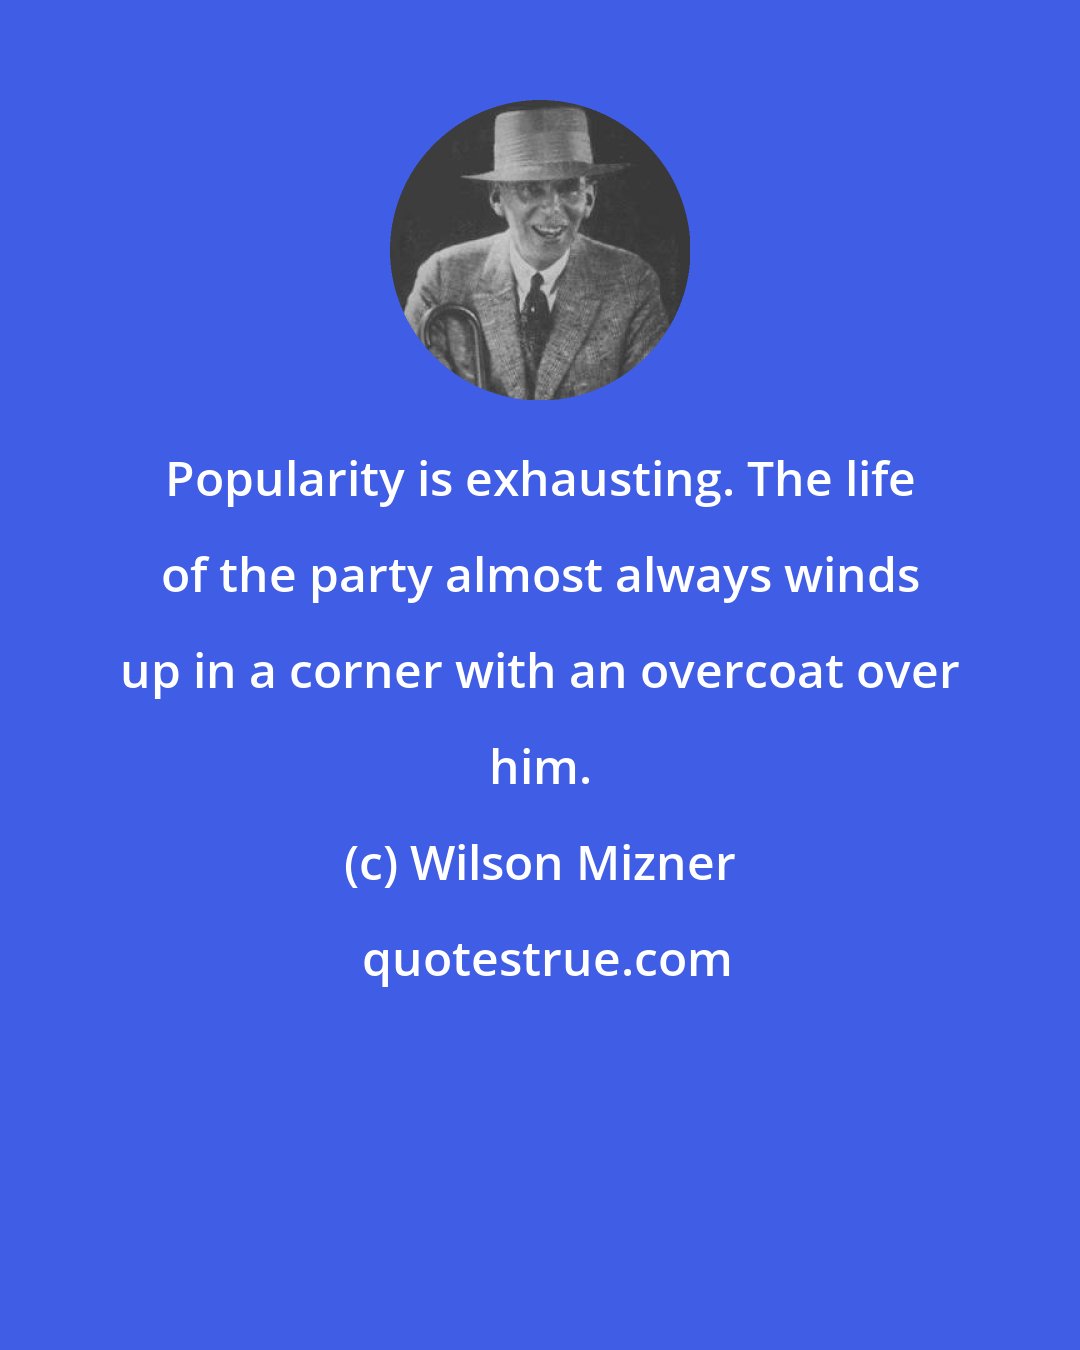 Wilson Mizner: Popularity is exhausting. The life of the party almost always winds up in a corner with an overcoat over him.